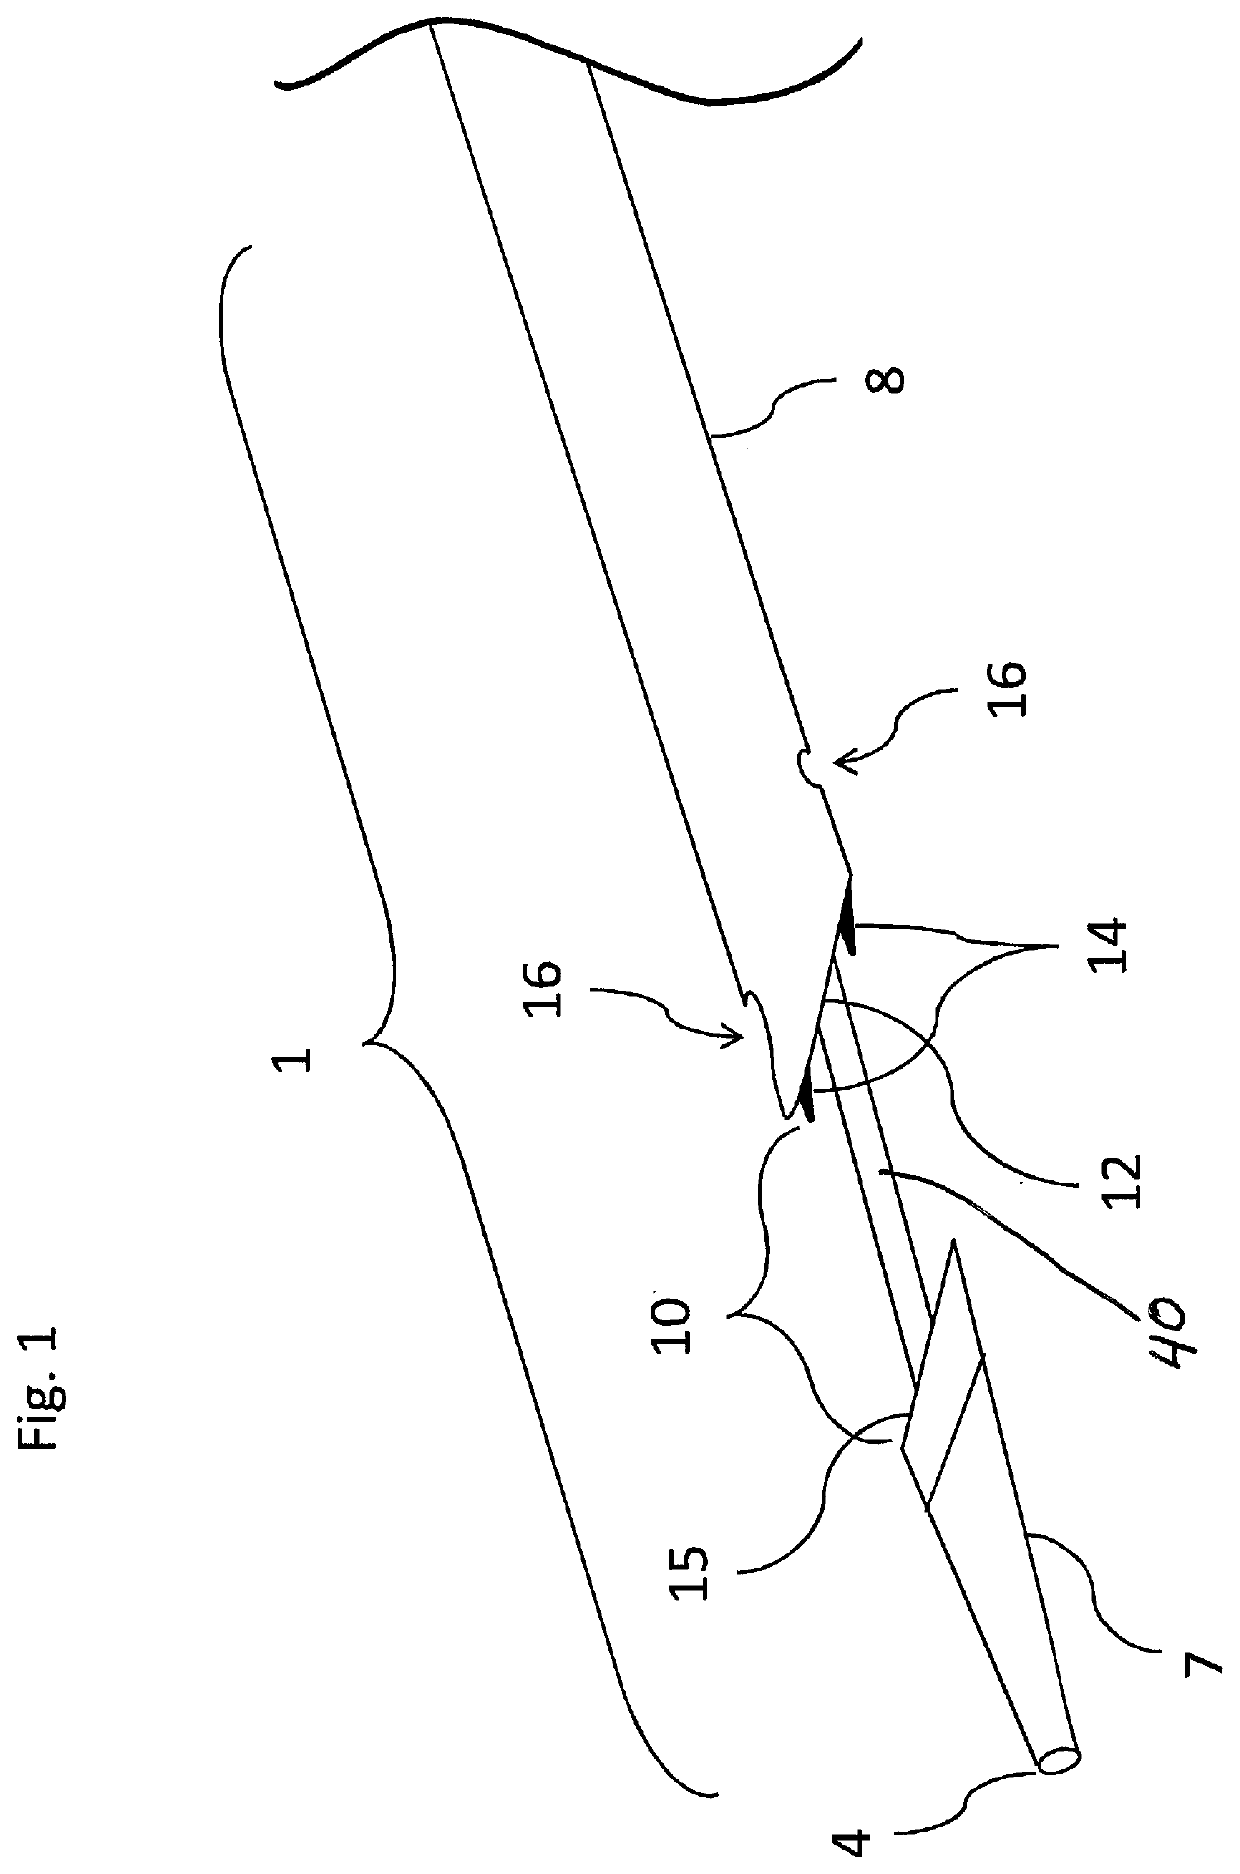 Externally supported anastomosis